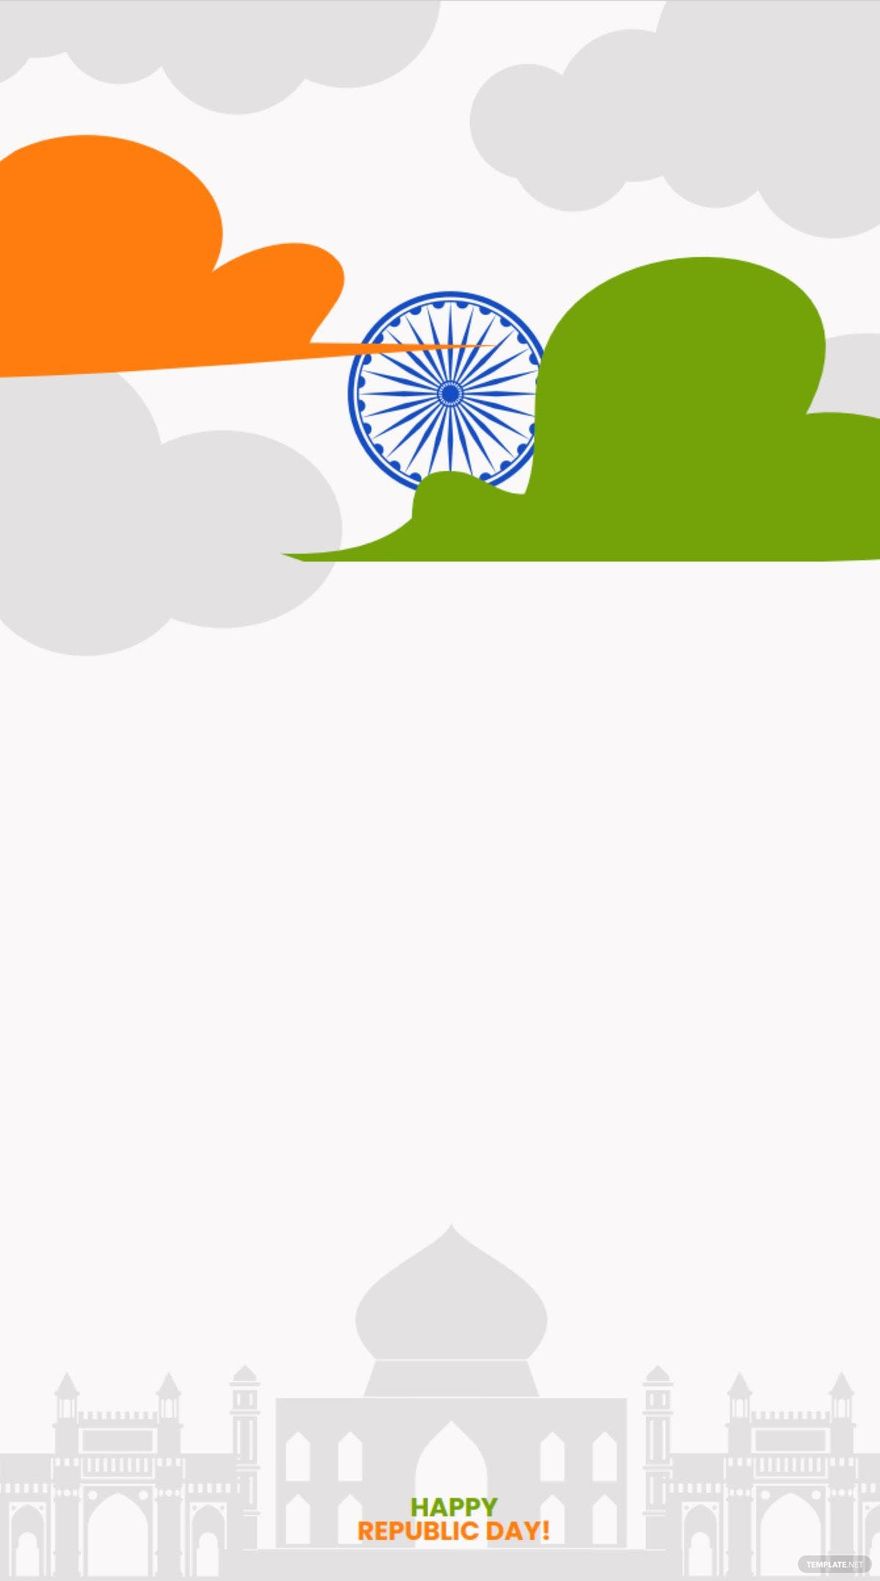 Republic Day iPhone Background in PDF, Illustrator, PSD, EPS, SVG, JPG, PNG